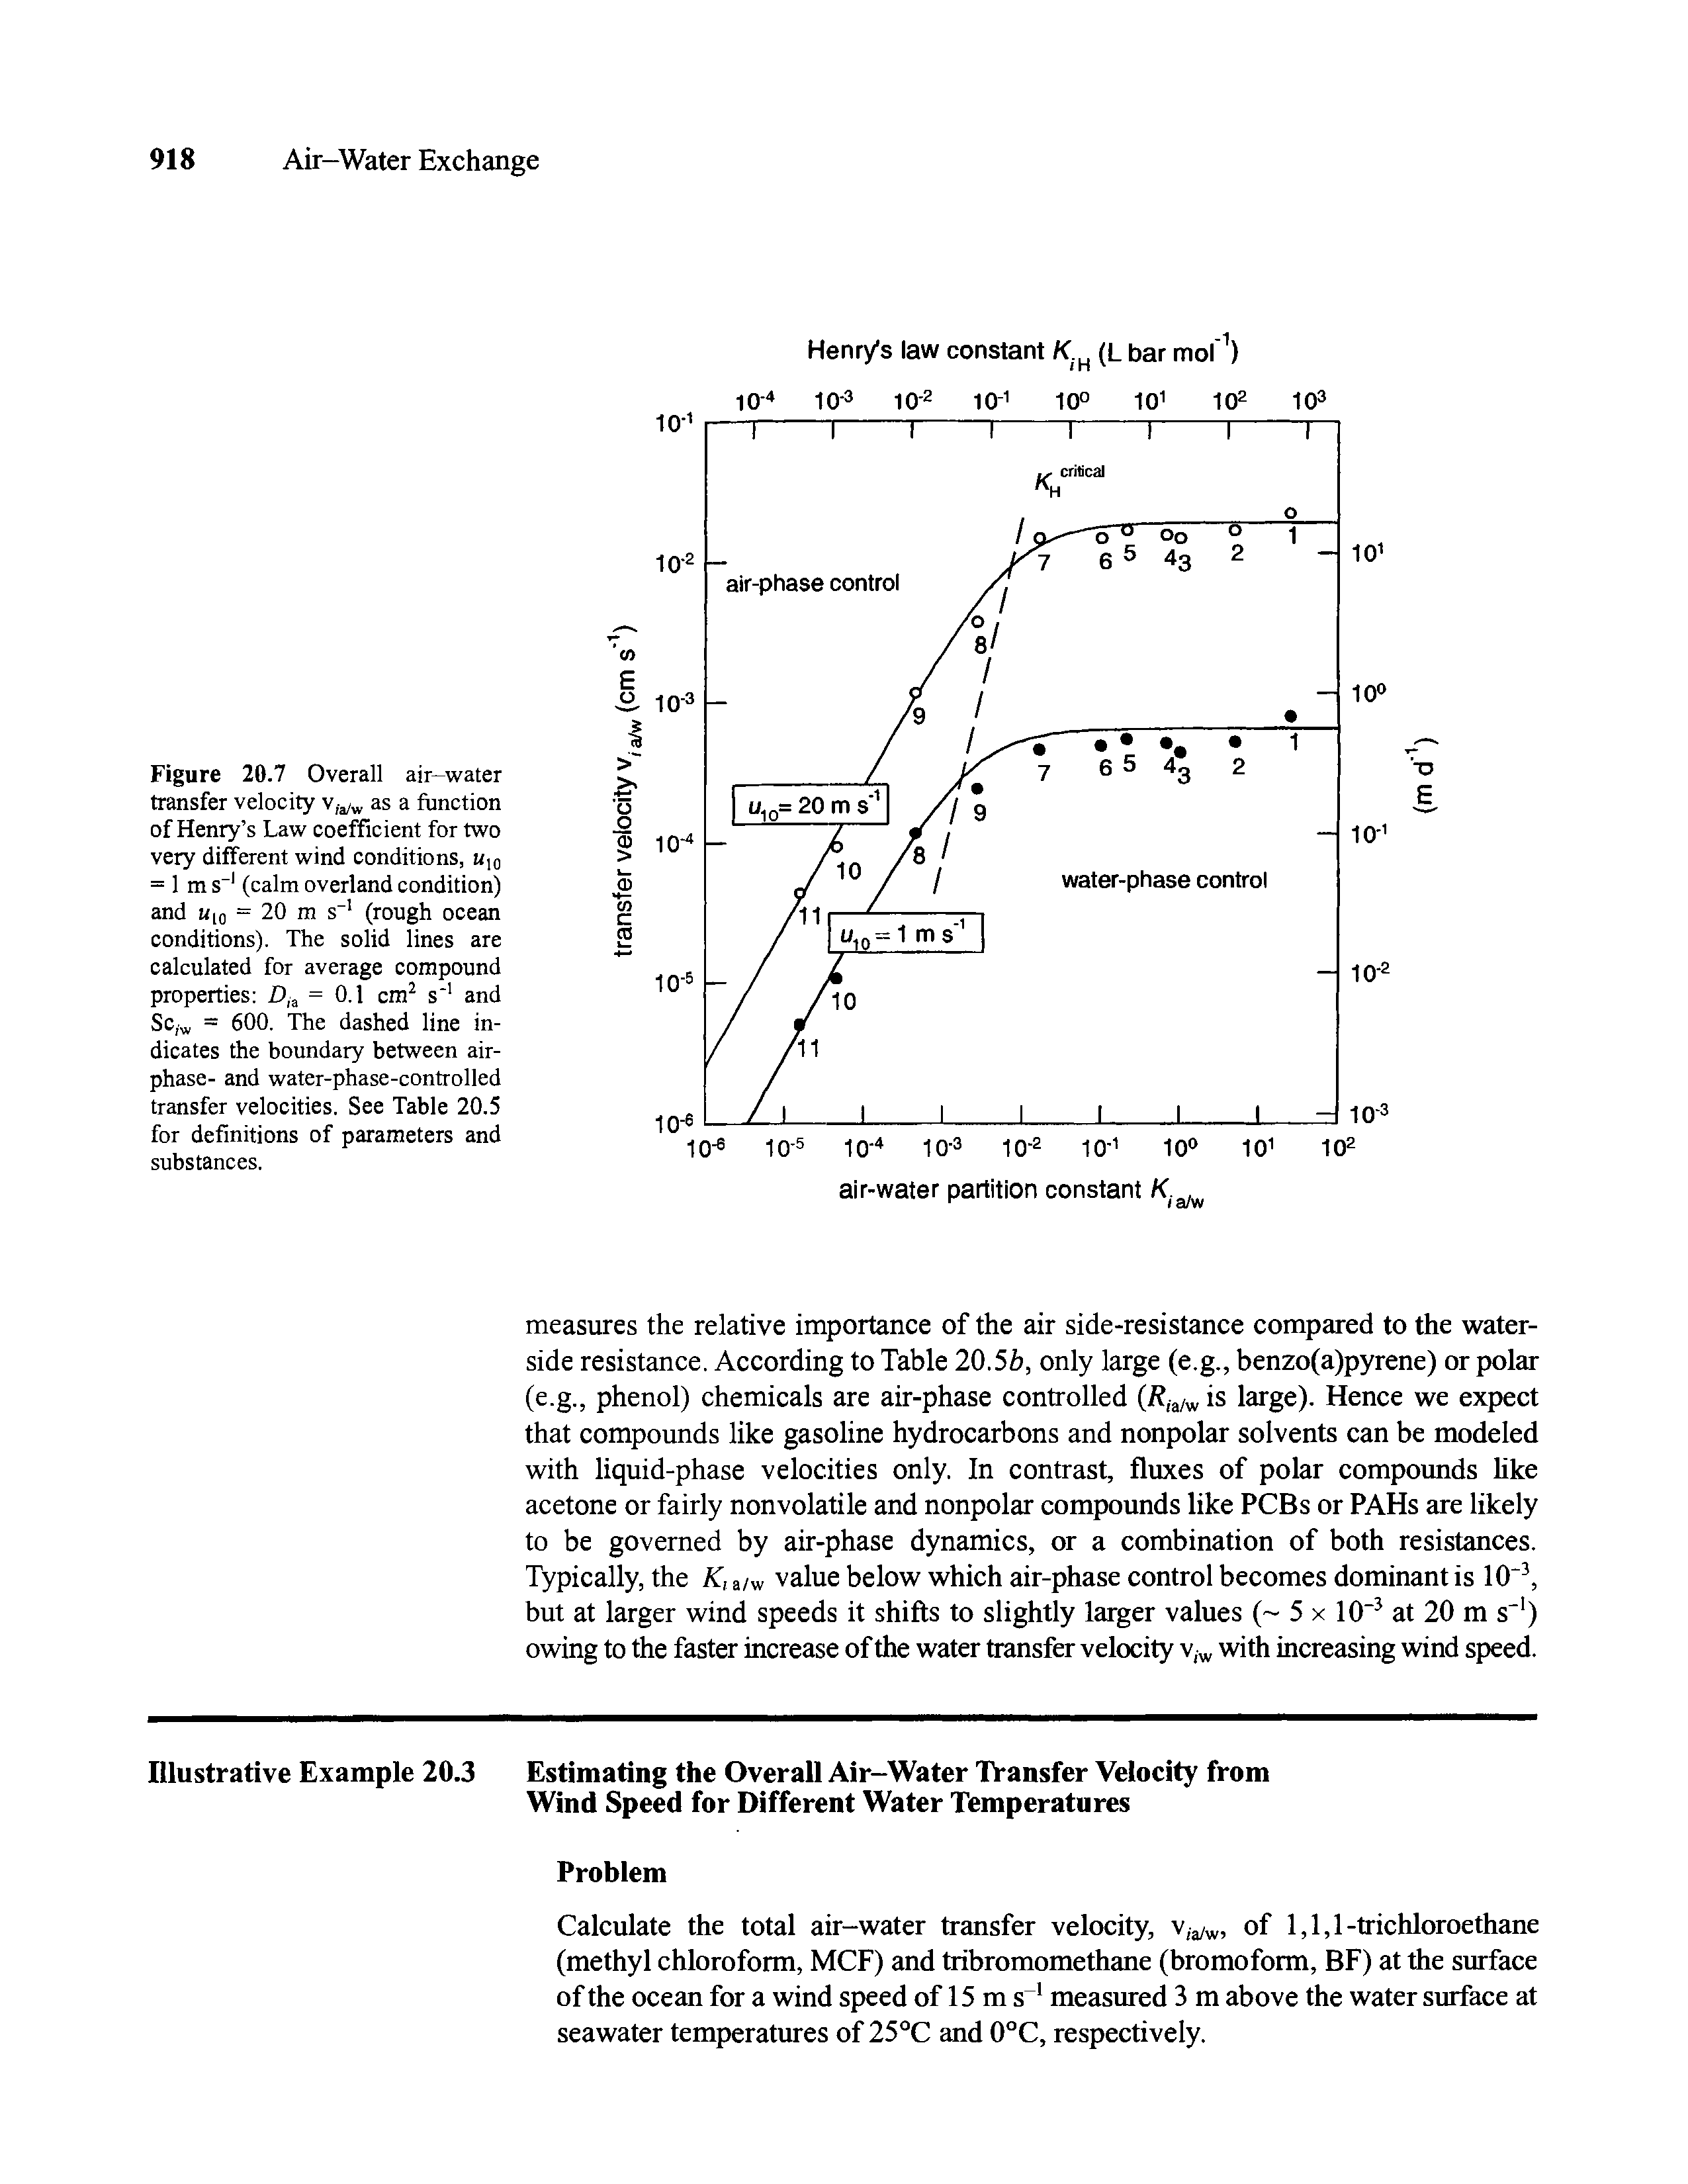 Figure 20.7 Overall air-water transfer velocity vla/w as a function of Henry s Law coefficient for two very different wind conditions, 10 = 1 m s l (calm overland condition) and Kl0 = 20 m s 1 (rough ocean conditions). The solid lines are calculated for average compound properties Diz = 0.1 cm2 s 1 and Sc,w = 600. The dashed line indicates the boundary between air-phase- and water-phase-controlled transfer velocities. See Table 20.5 for definitions of parameters and substances.